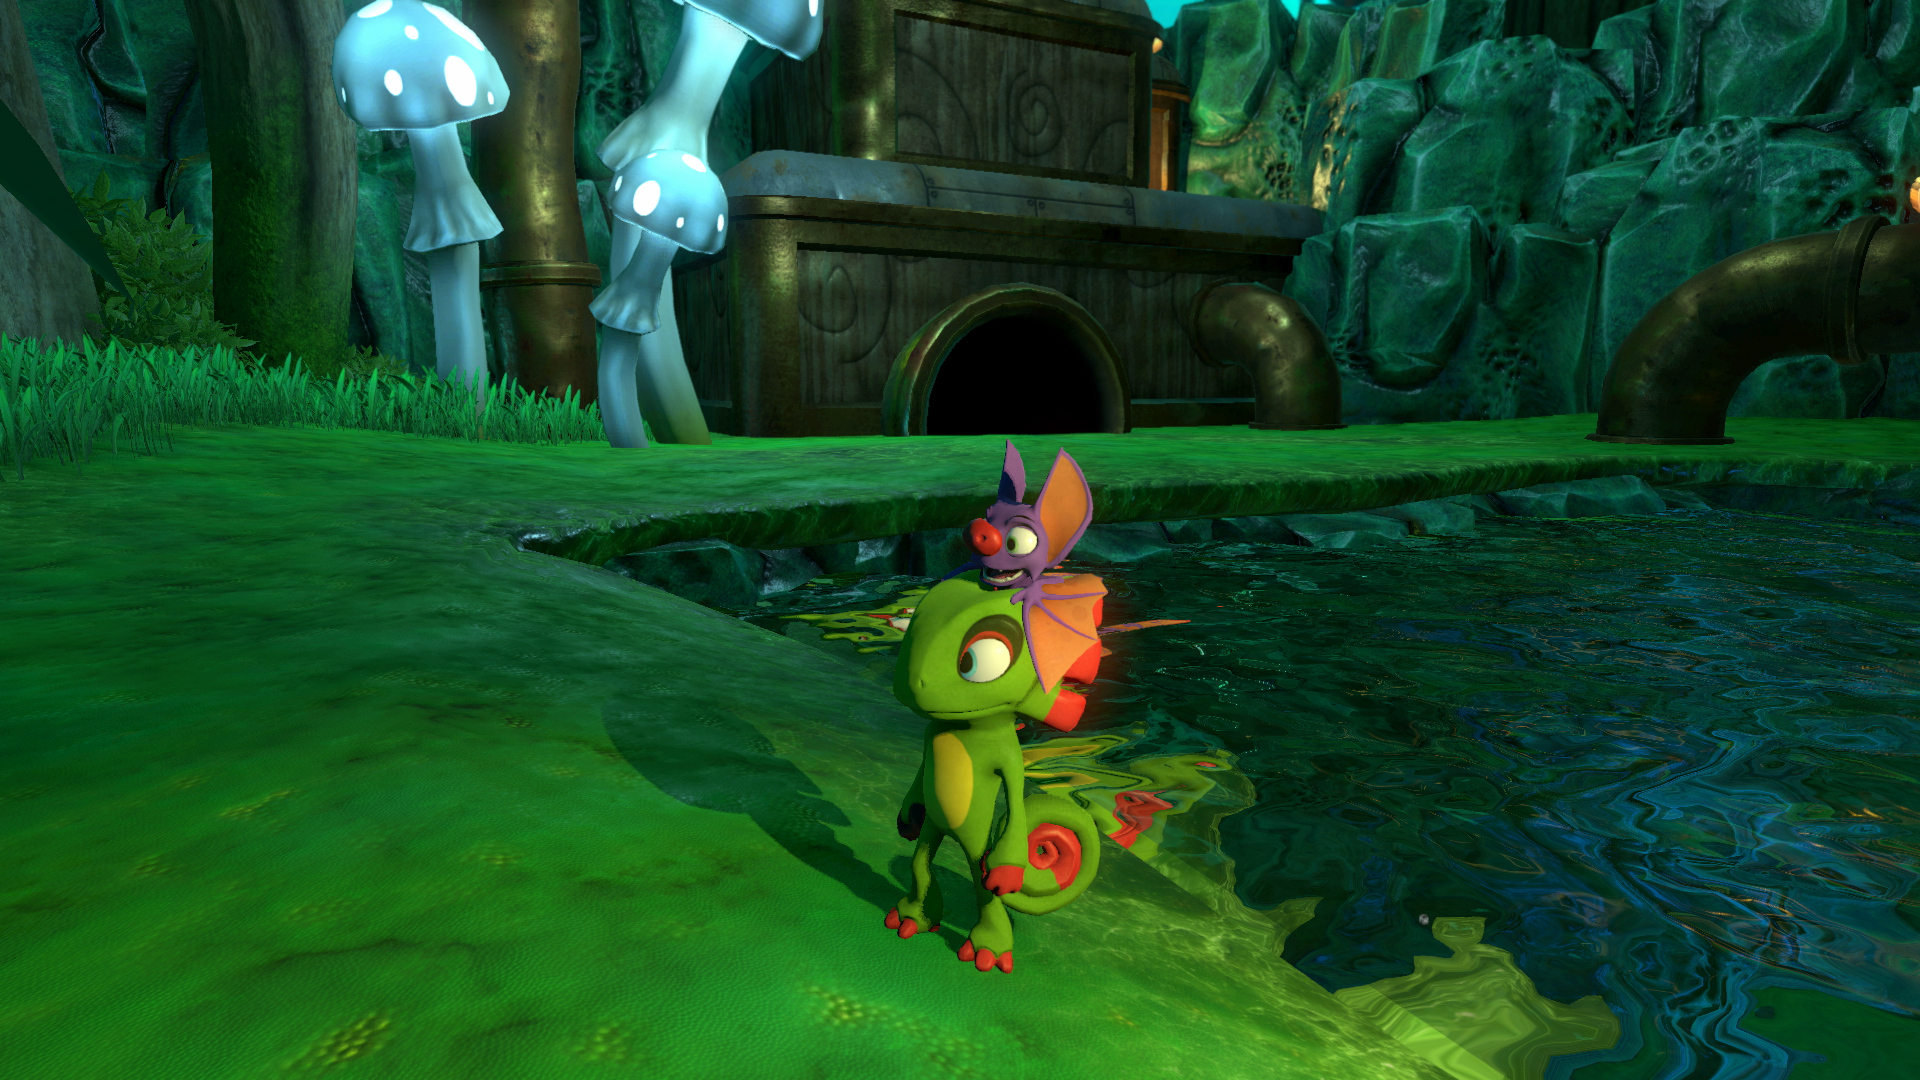 Image for Yooka Laylee Pirate Treasure Location Guide